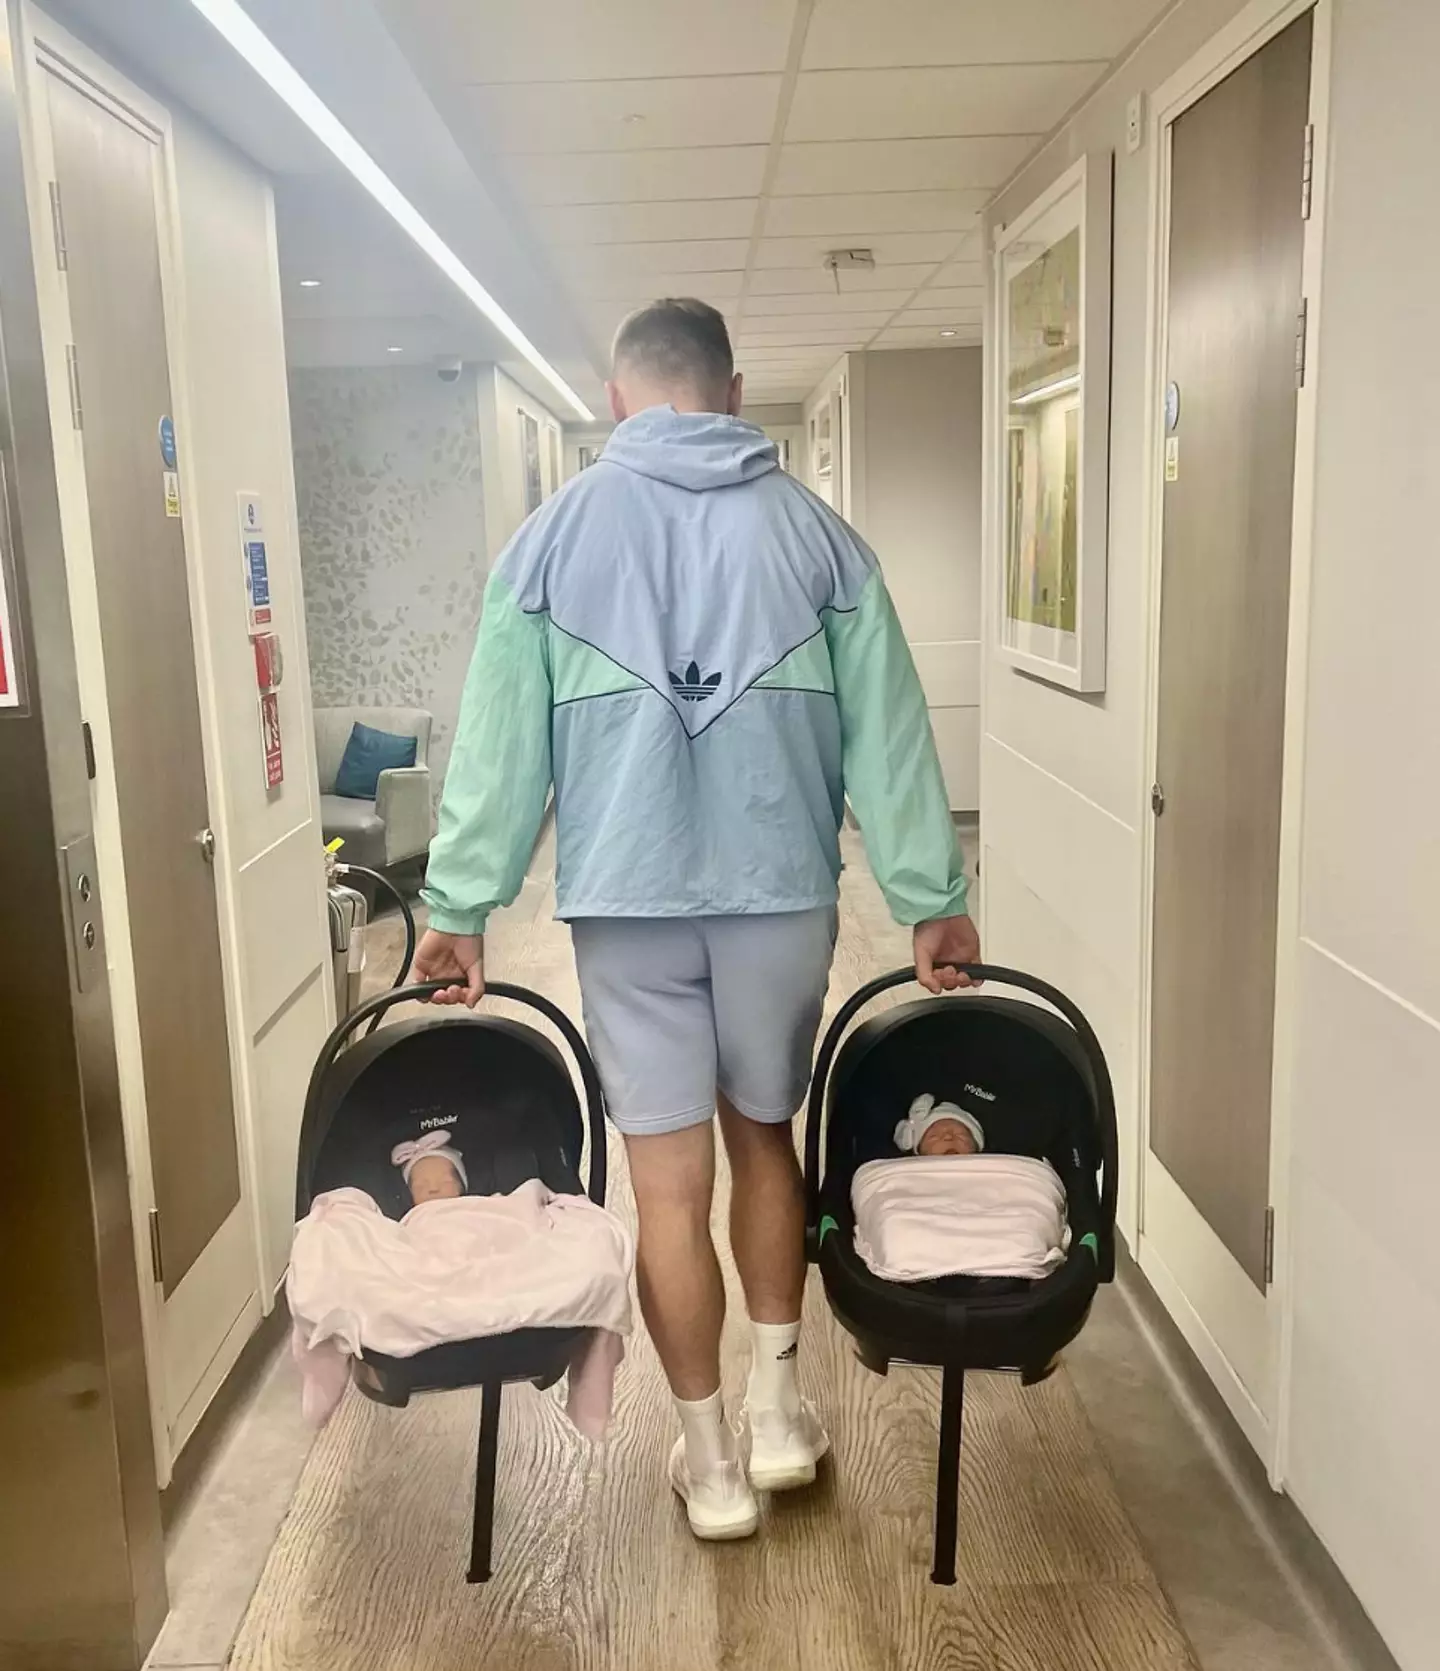 Jarrod leaving the hospital with the twins.